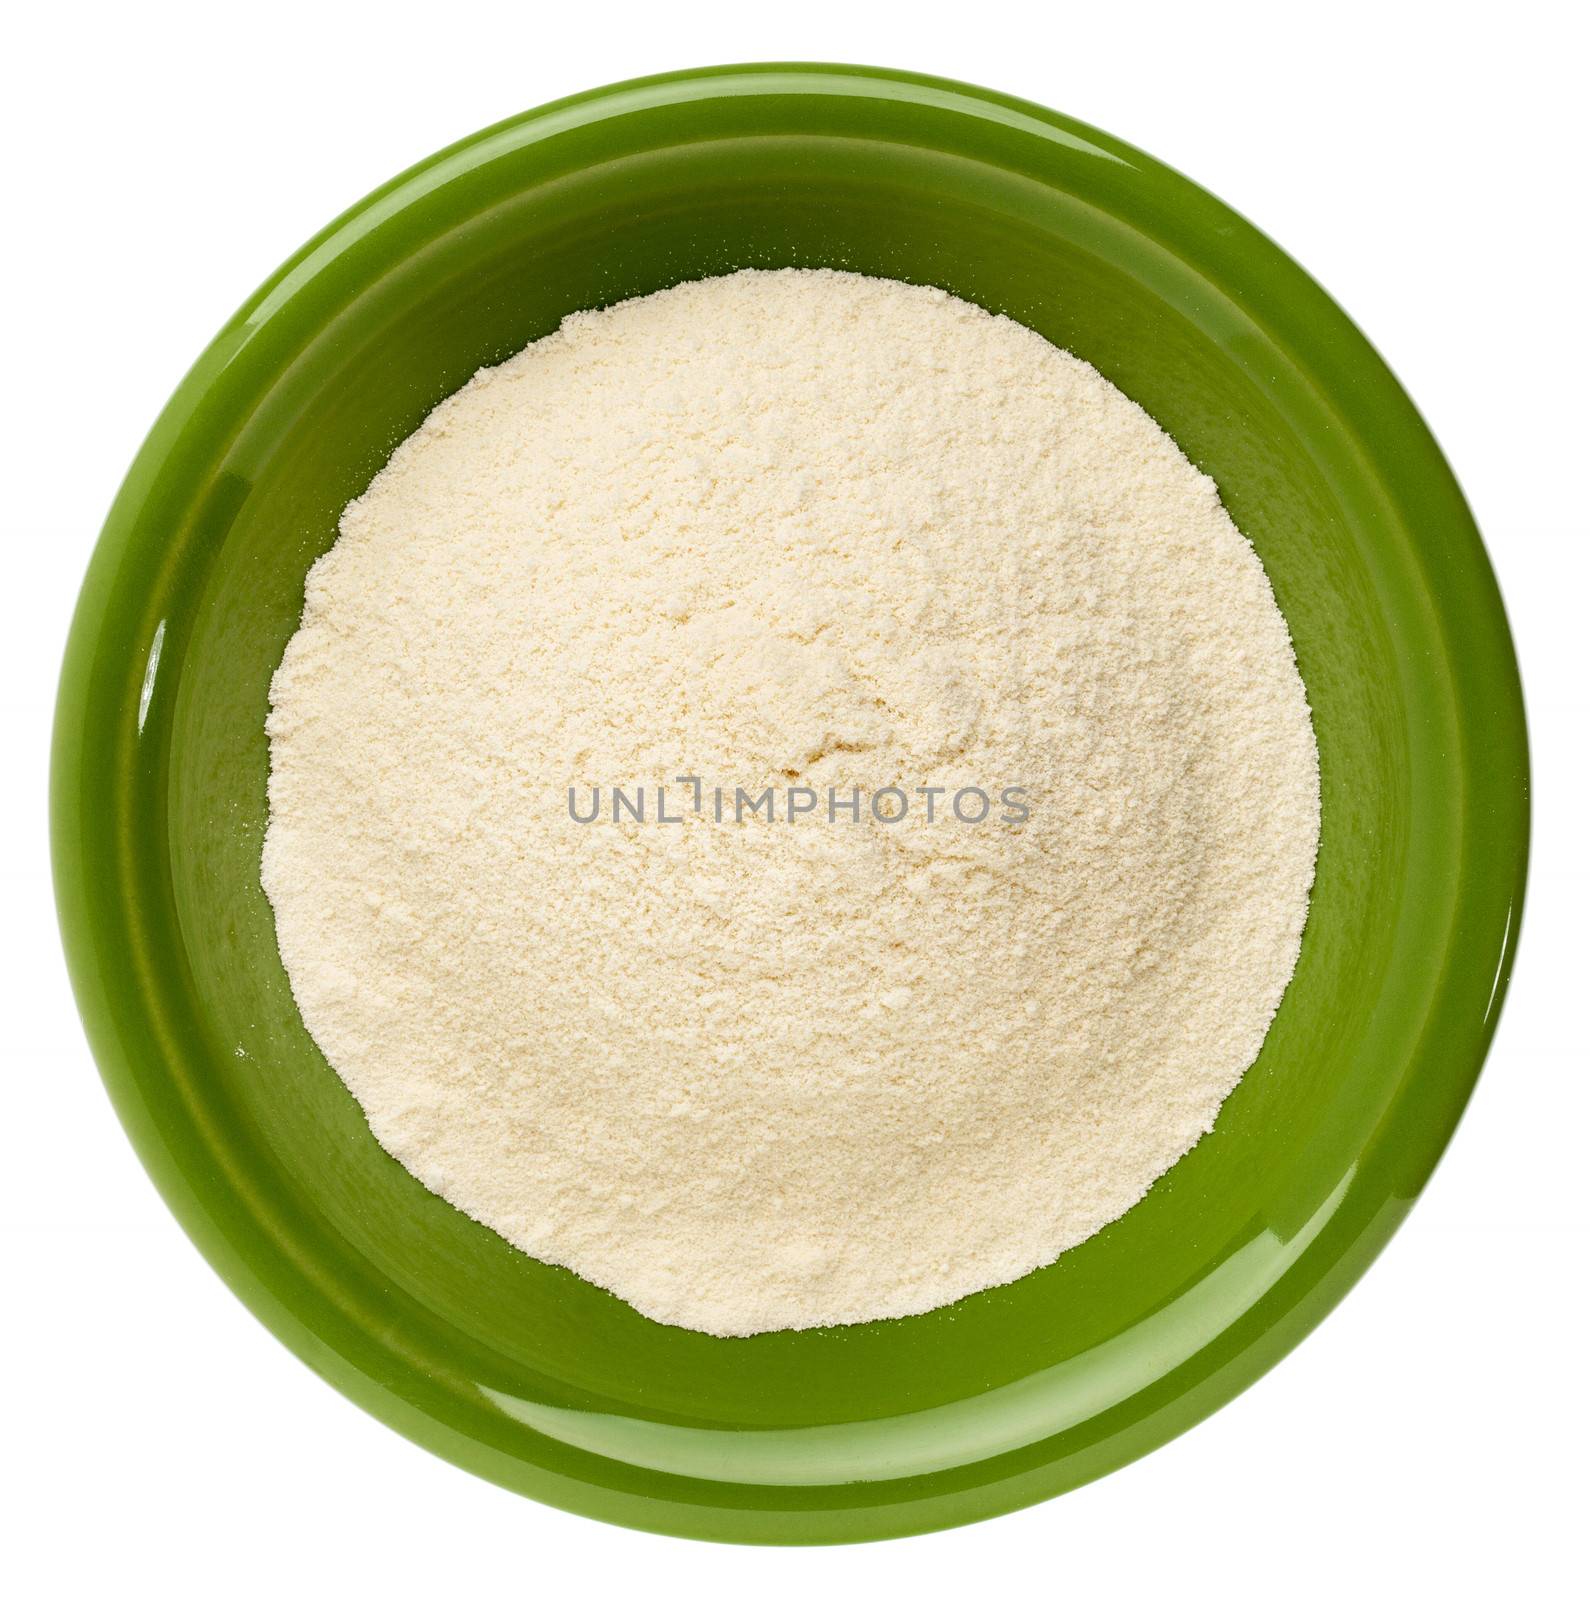 whey protein powder in a small ceramic bowl isolated on white